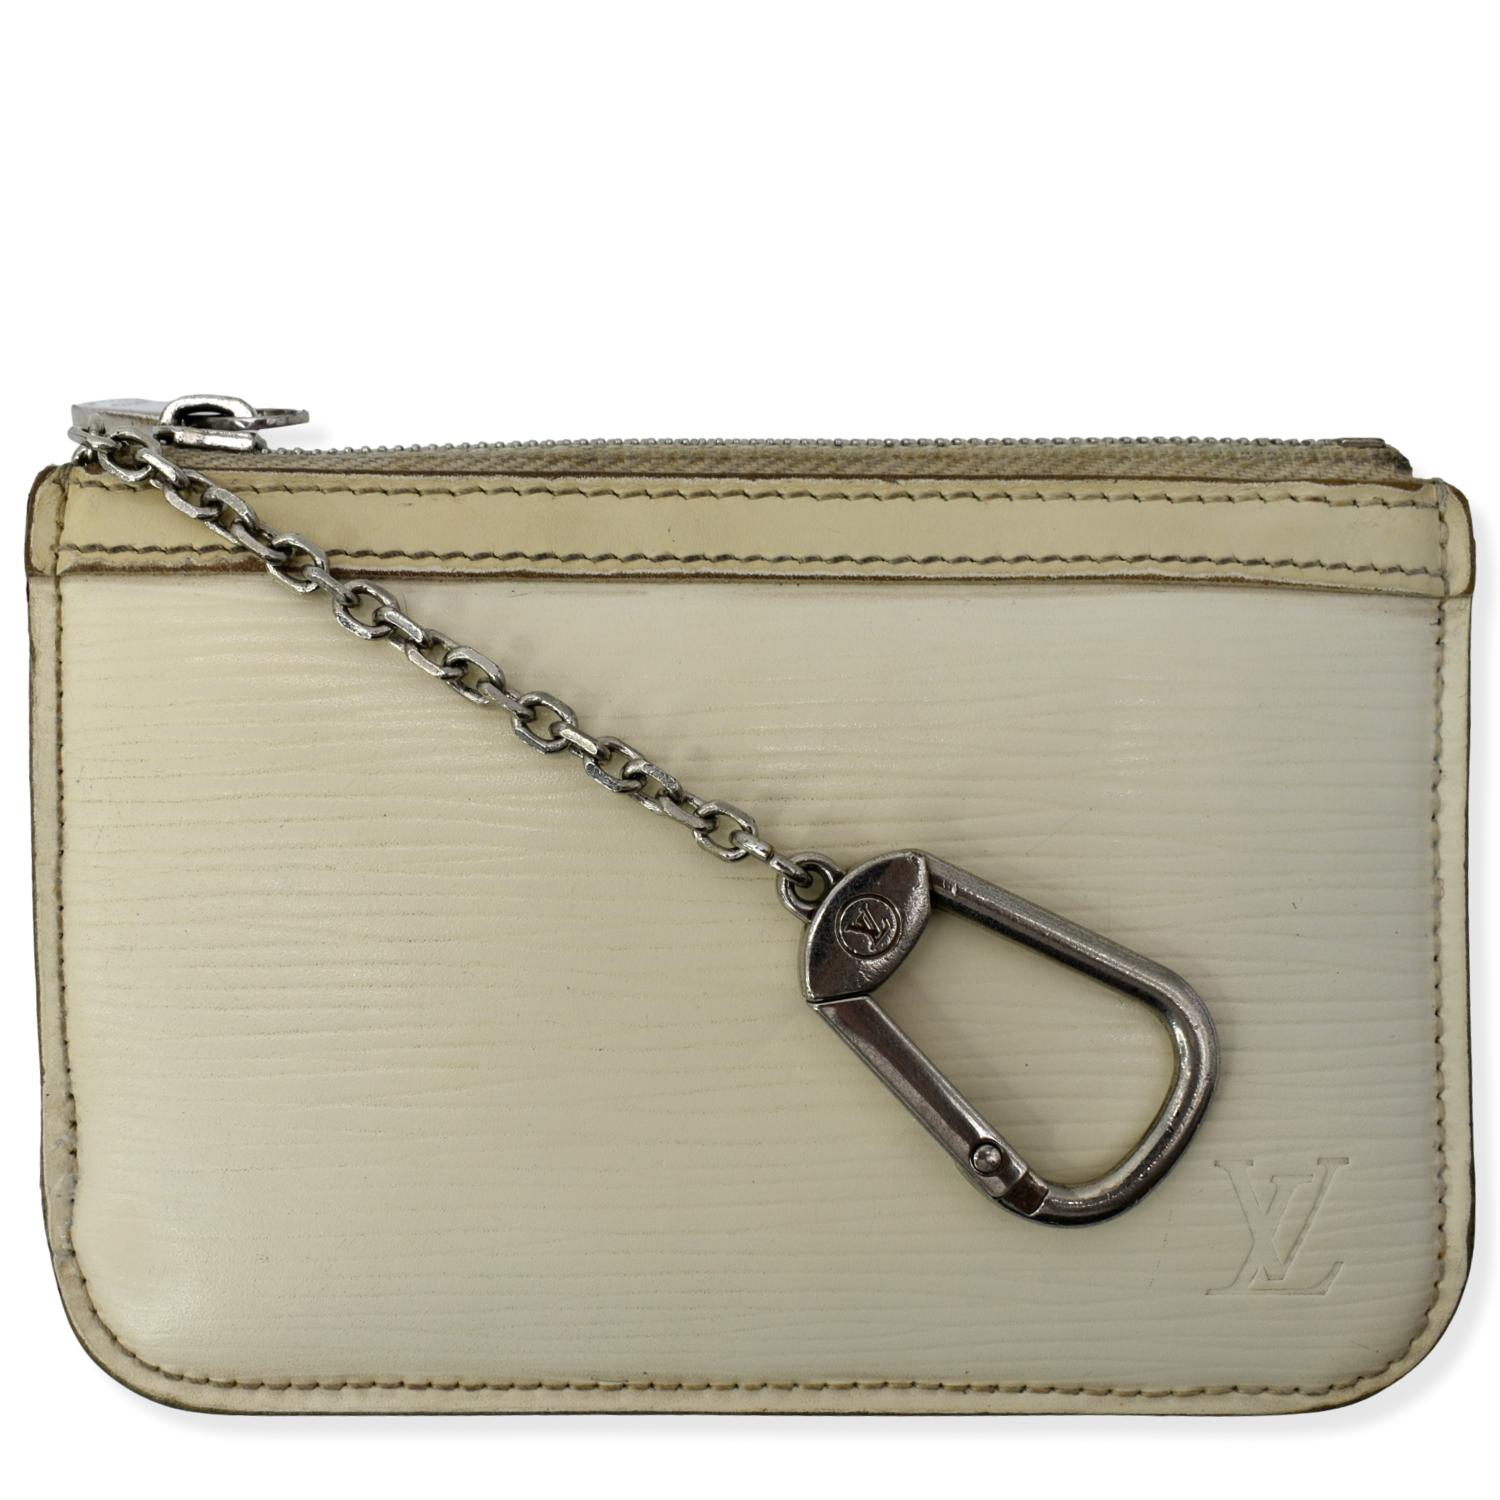 Key Coin Purse in Epi leather, Silver Hardware